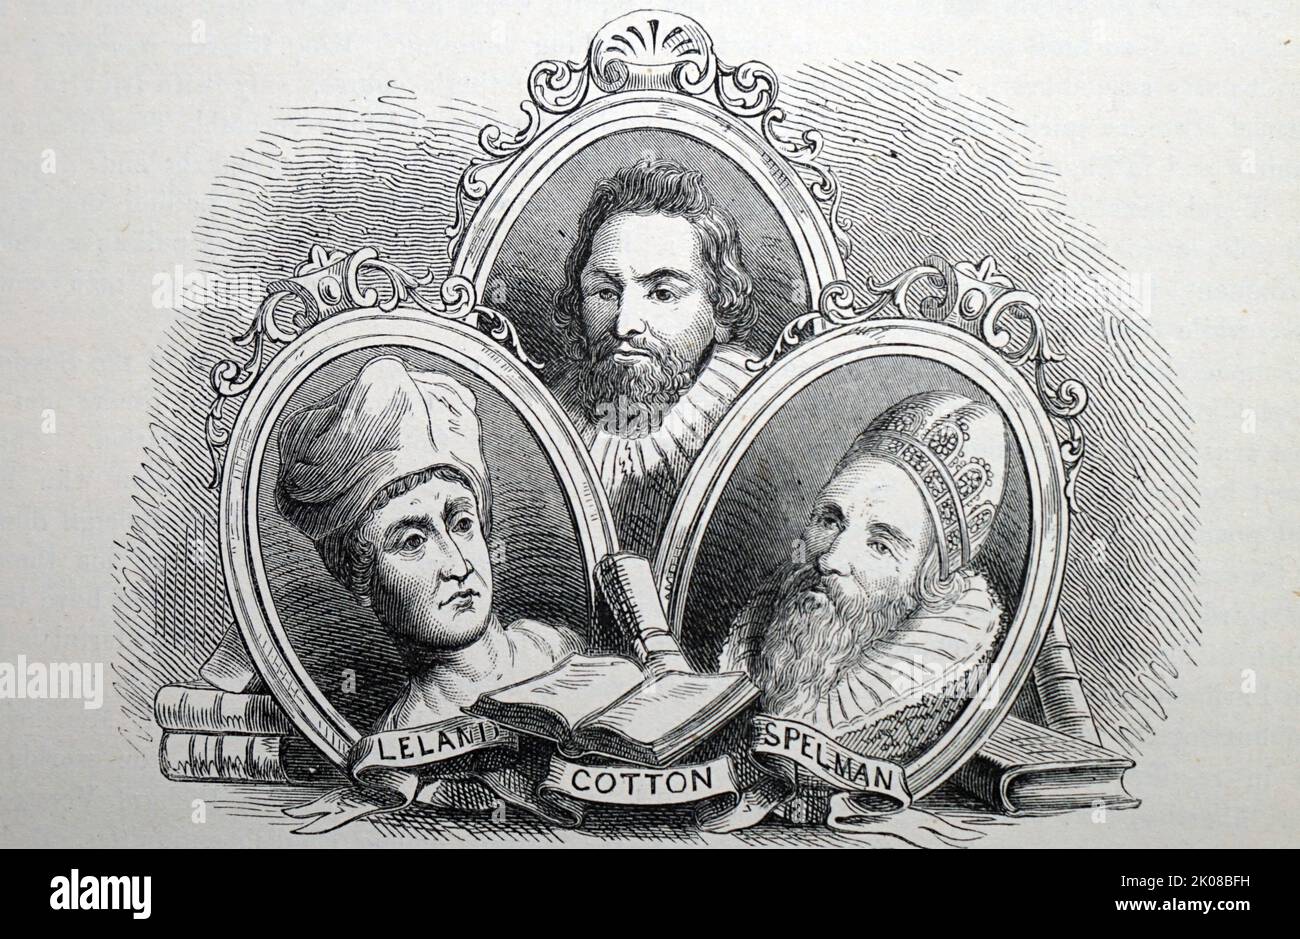 English Antiquaries. Black and white Illustration of Leland, Cotton and Spelman. John Leland or Leyland (13 September, c. 1503 - 18 April 1552) was an English poet and antiquary. Sir Robert Bruce Cotton, 1st Baronet (22 January 1570/1 - 6 May 1631) was a Member of Parliament and an antiquarian who founded the Cotton library. Sir Henry Spelman (c. 1562 - October 1641) was an English antiquary, noted for his detailed collections of medieval records, in particular of church councils Stock Photo